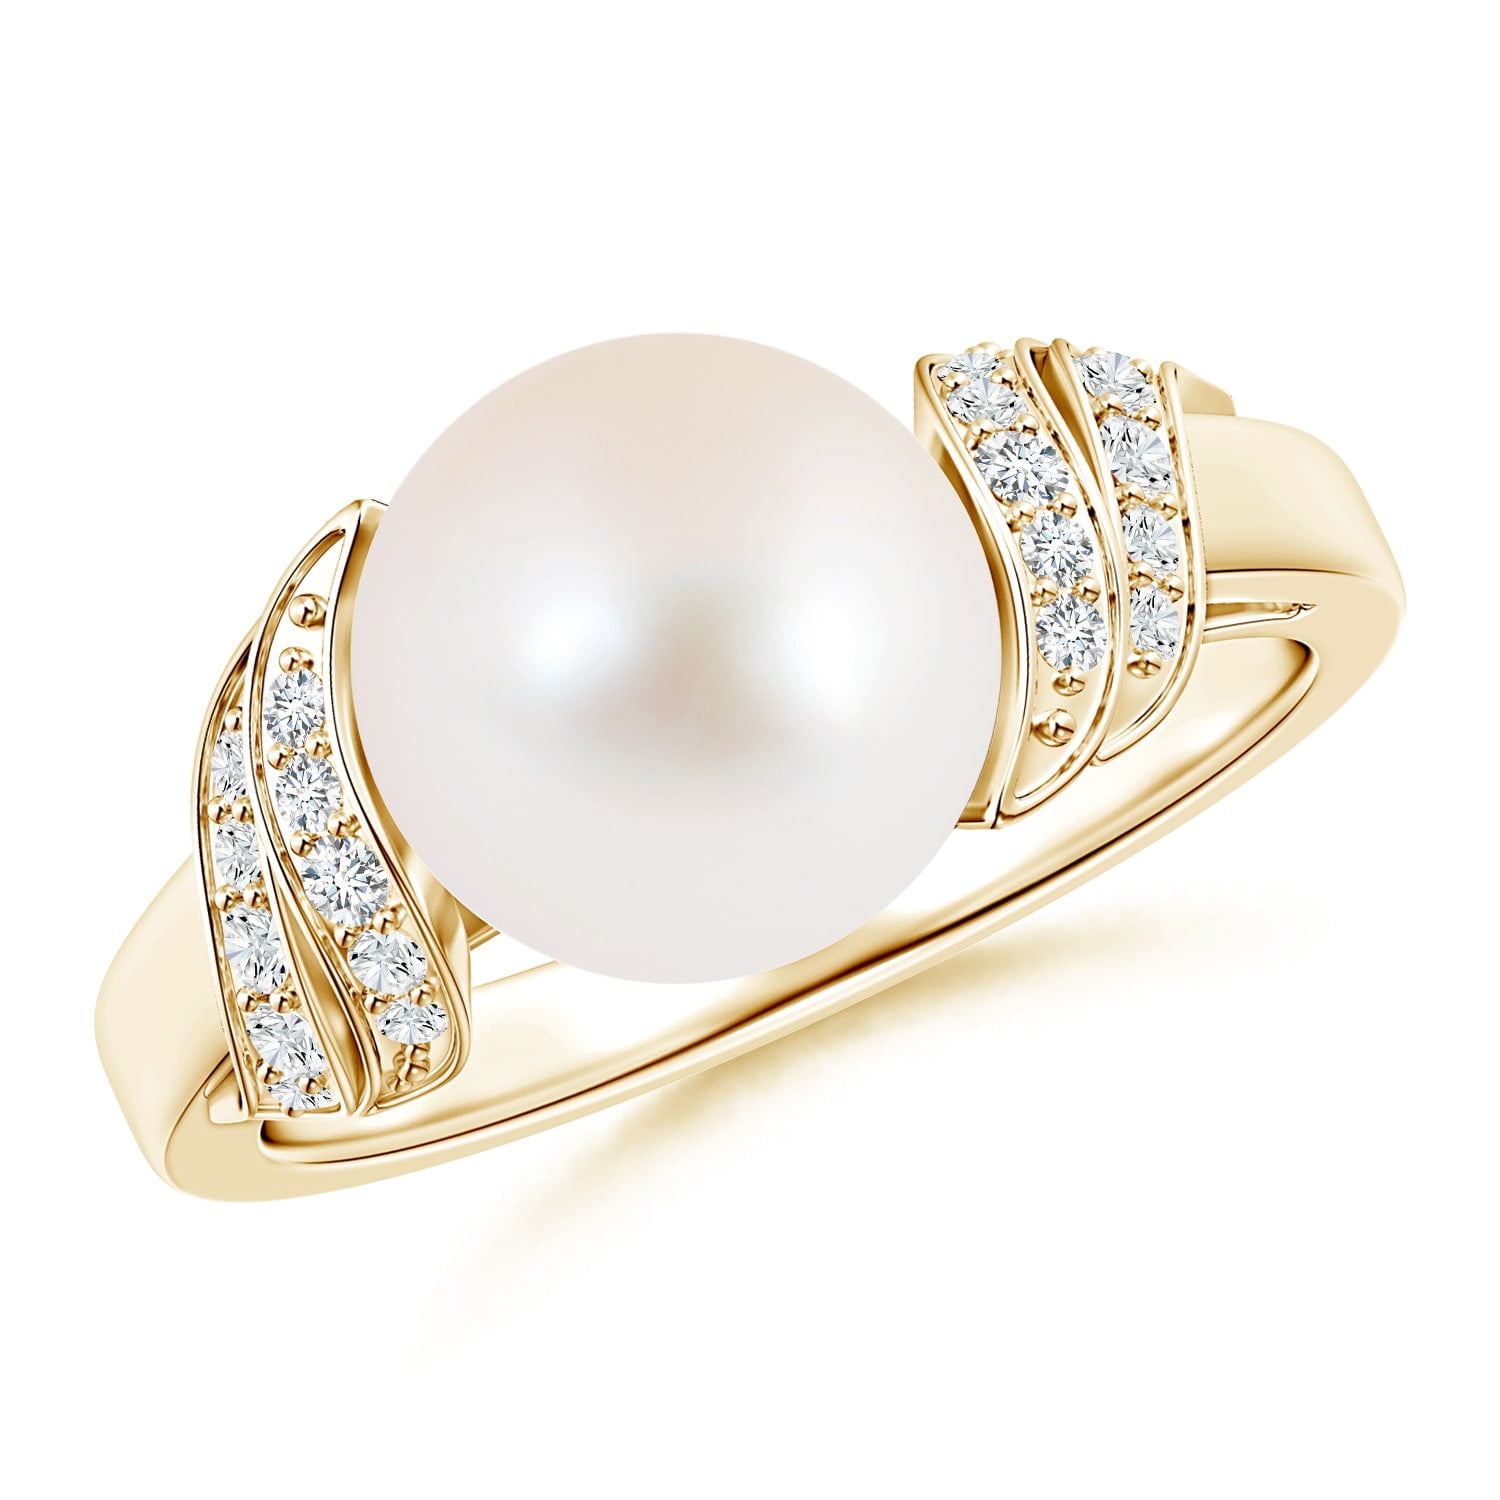 Bridal Ring 14kt Yellow Gold Mounting Size 7 and 8 only June Gemstone Ring Pearl Ring 14kt Solid Yellow Gold White or Black Pearl 6mm